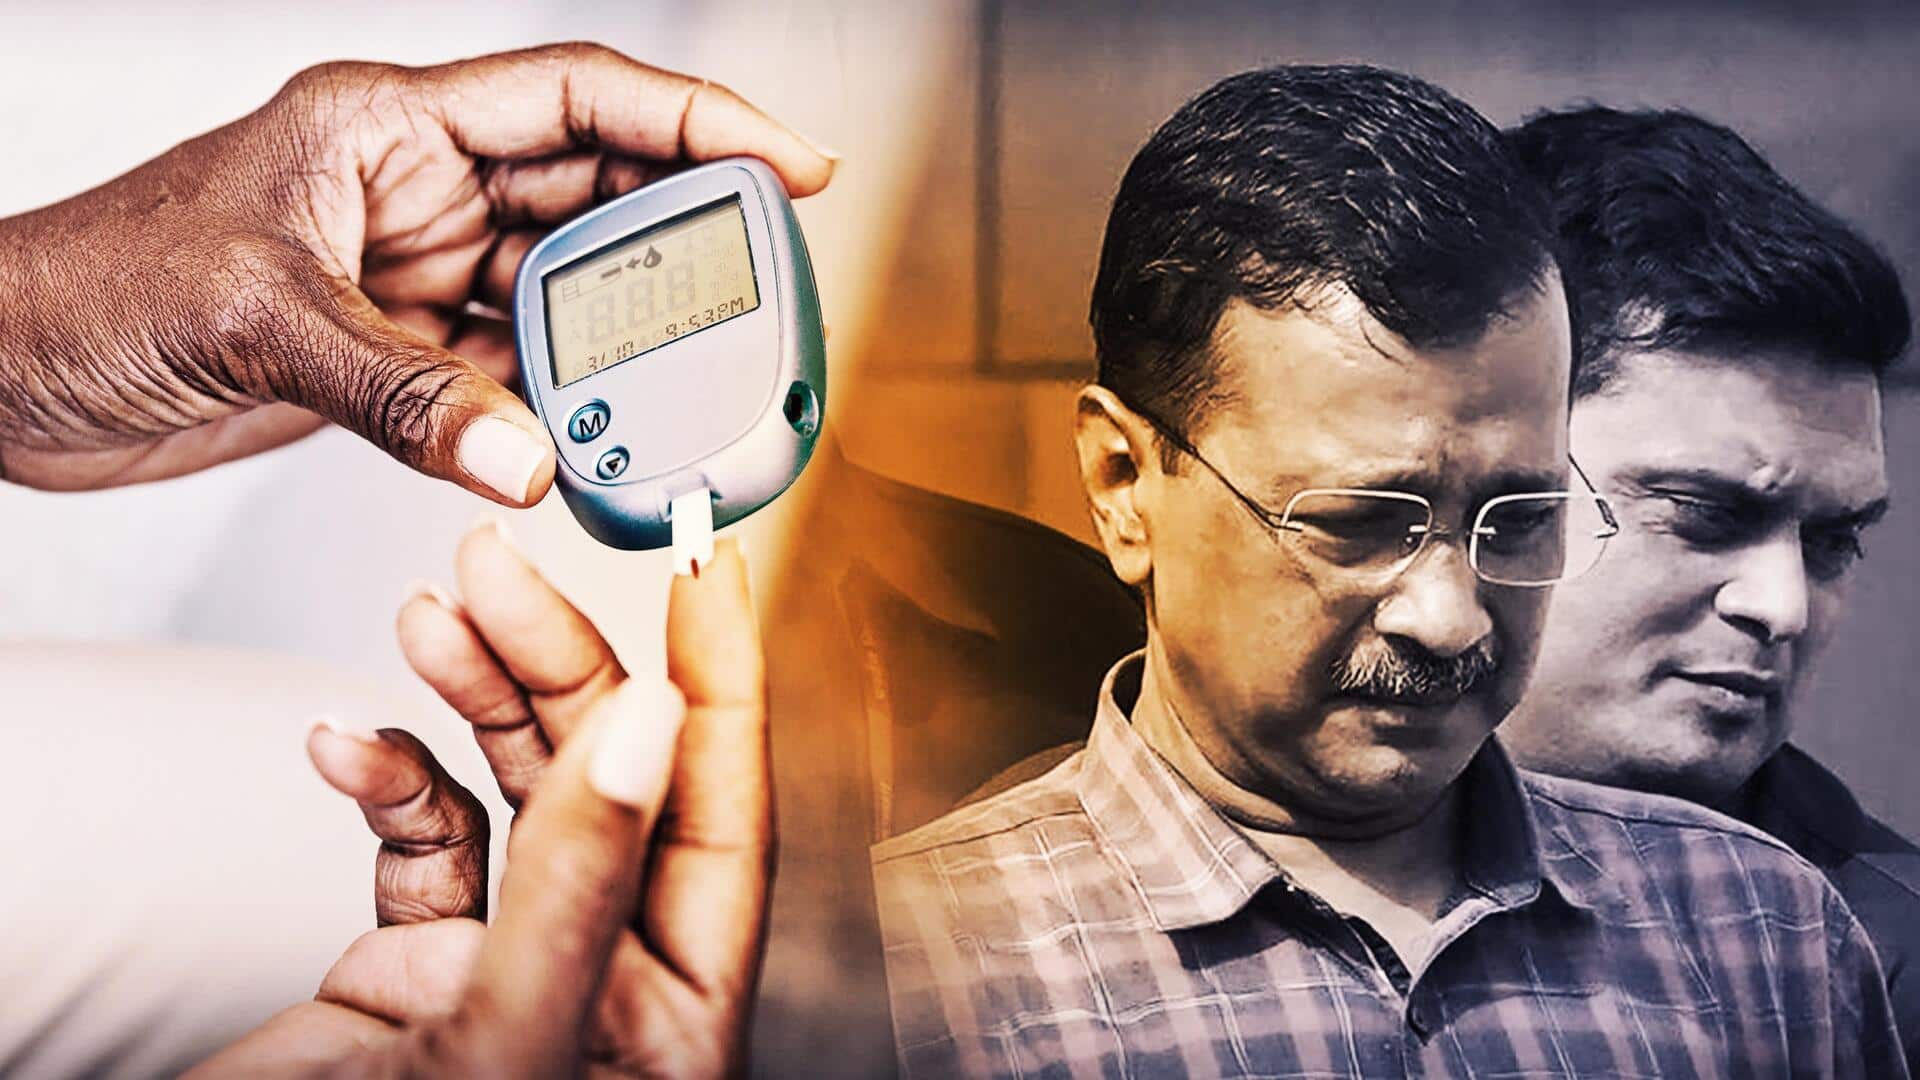 Delhi court denies Kejriwal's request for video consultations with doctor